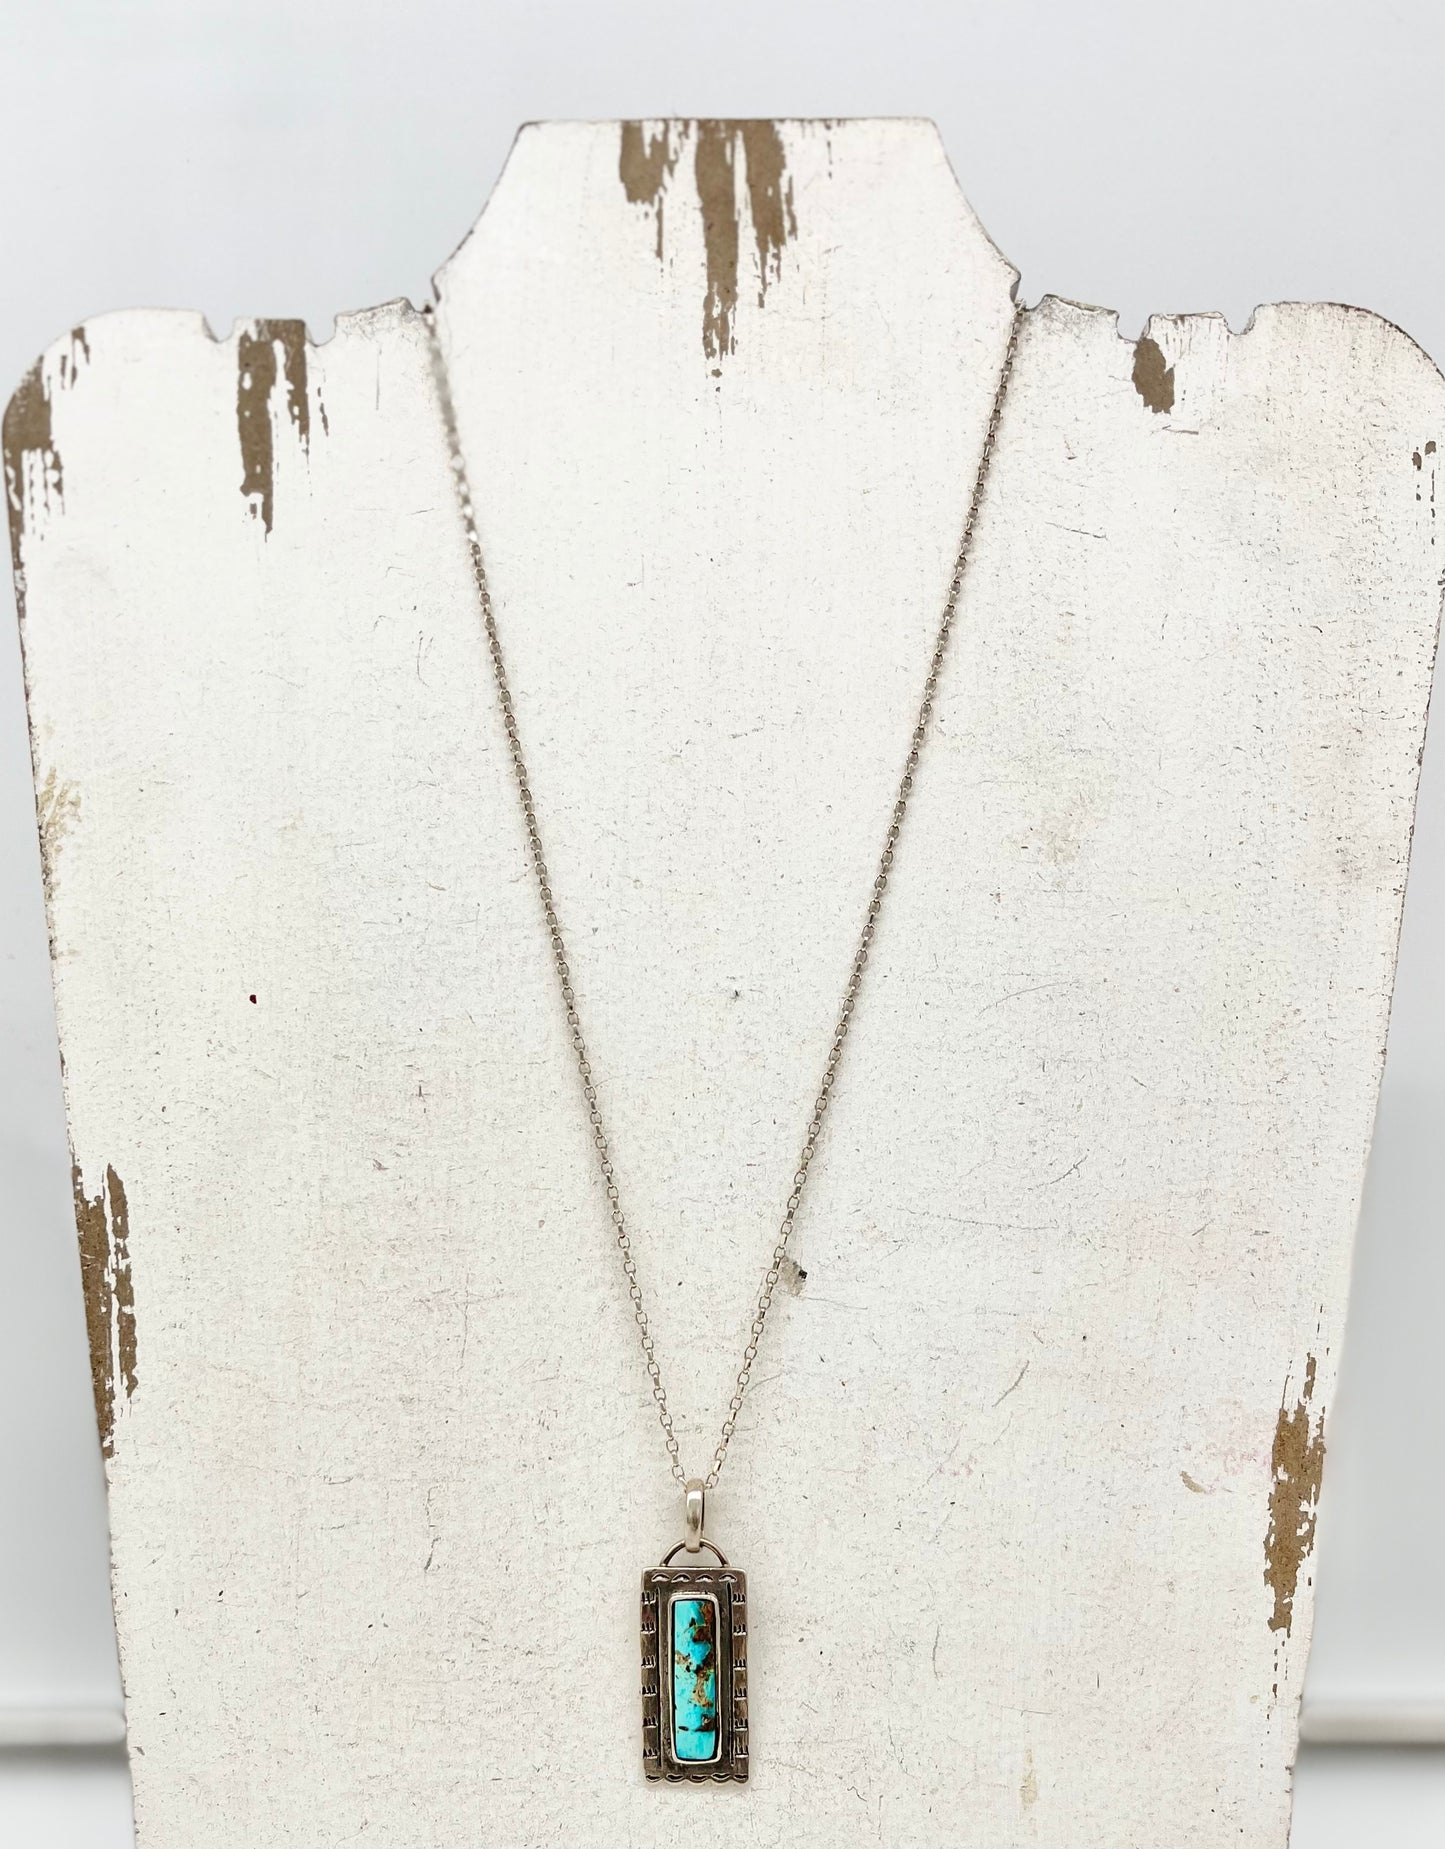 Necklace- Sterling Silver and Turquoise Charm on Sterling Silver chain